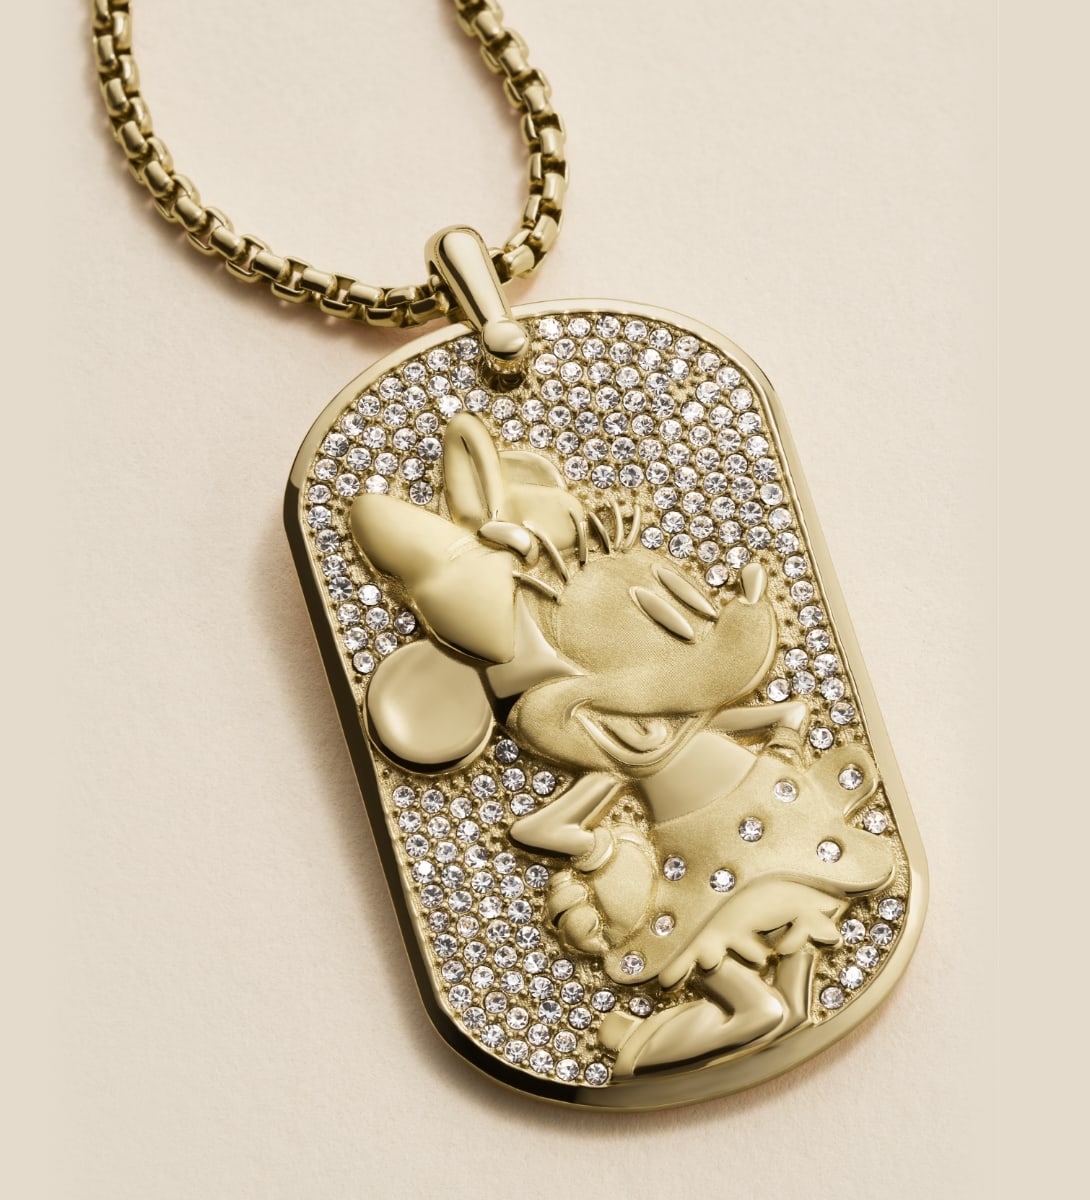 Disney Fossil Special Edition Gold-Tone Stainless Steel Dog Tag Necklace -  JF04625710 - Fossil